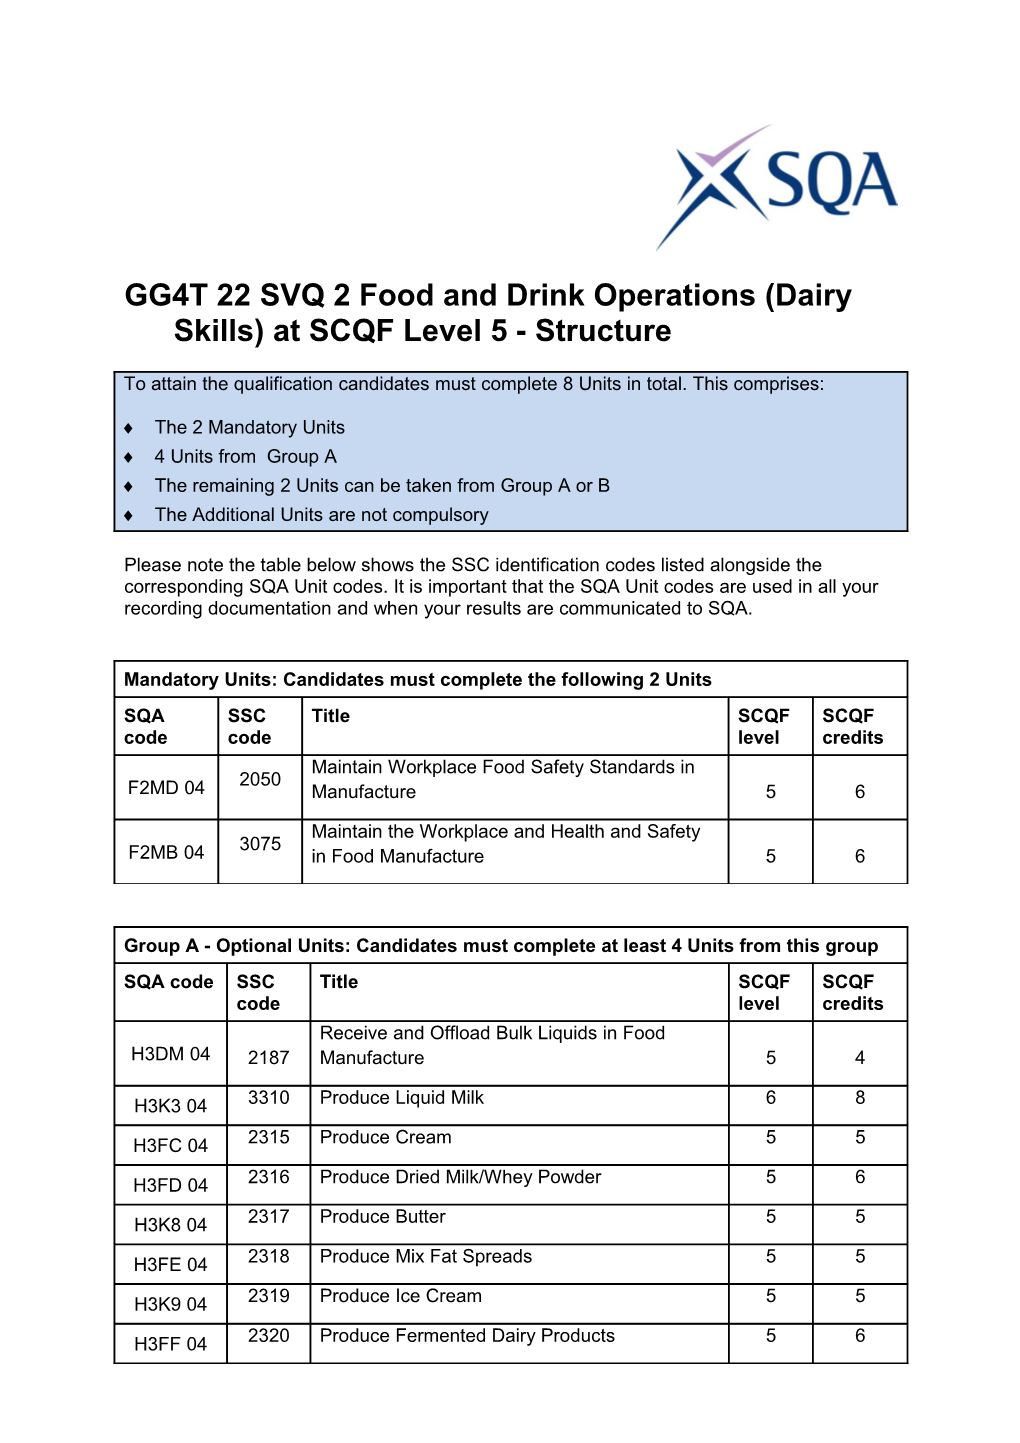 GG4T 22SVQ 2 Food and Drink Operations (Dairy Skills) at SCQF Level 5 - Structure